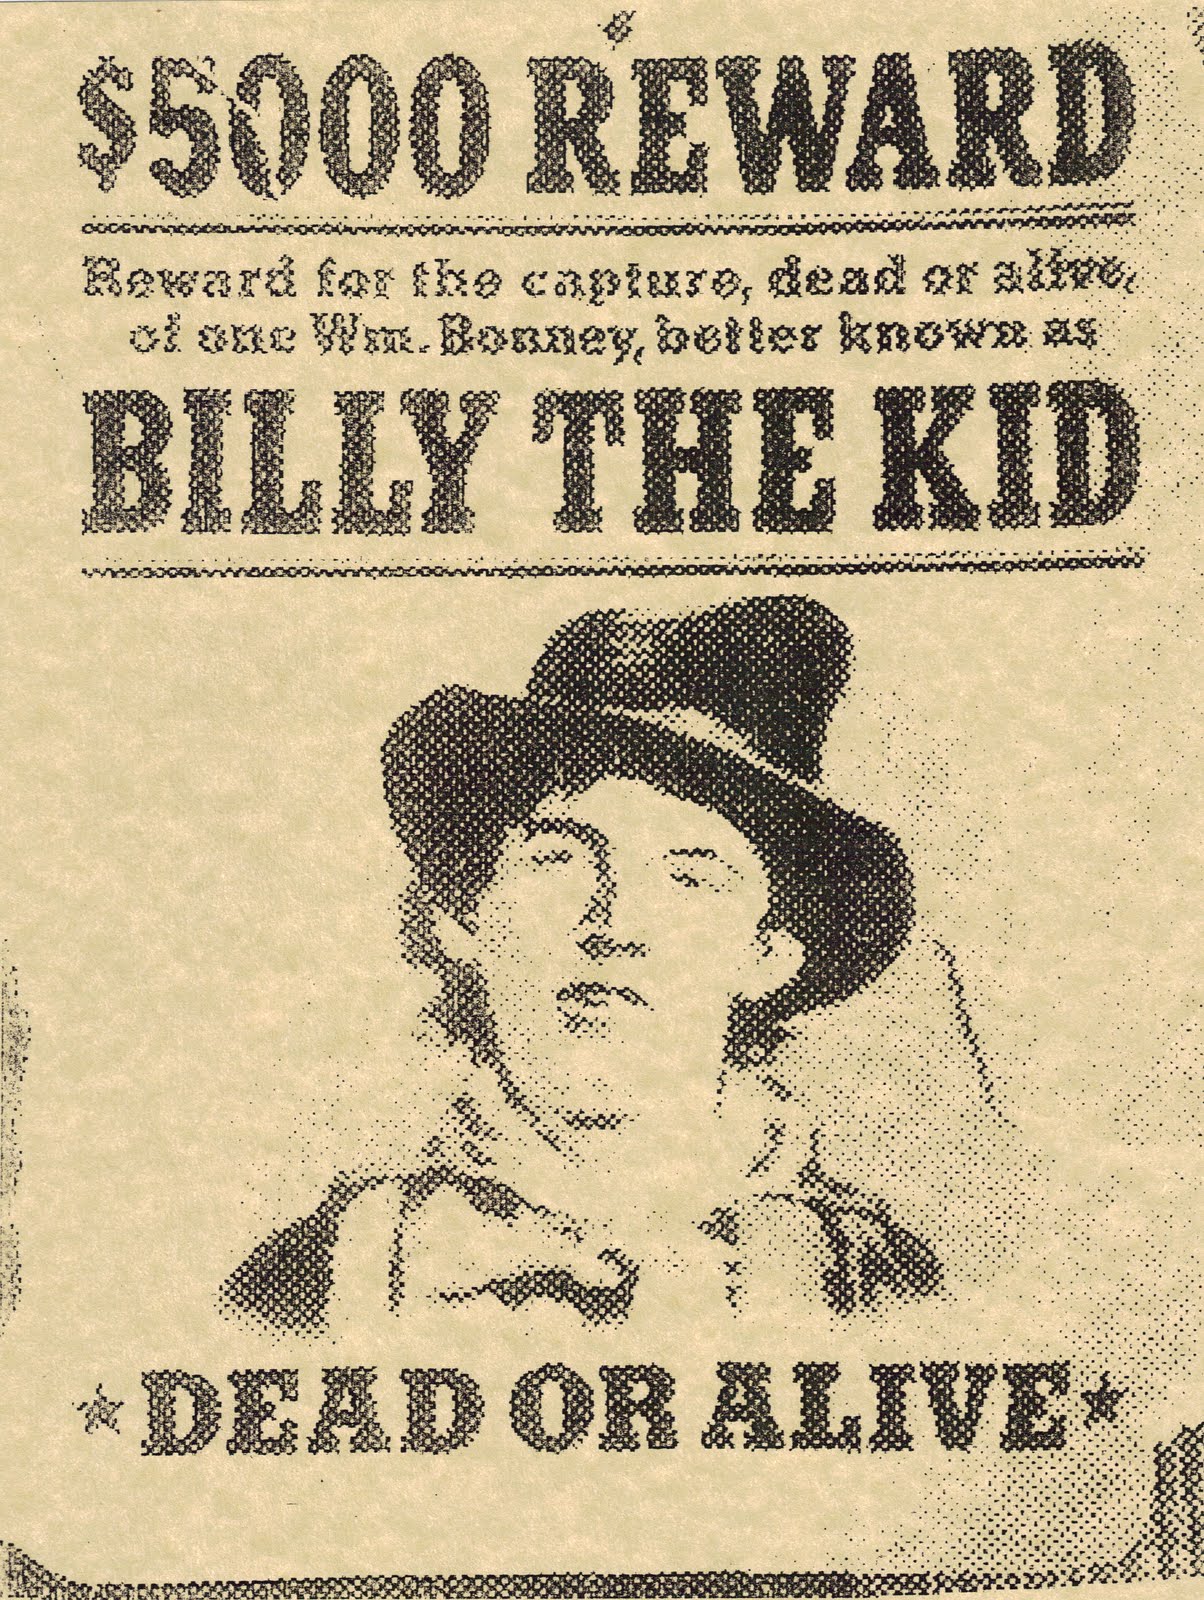 Image result for billy the kid